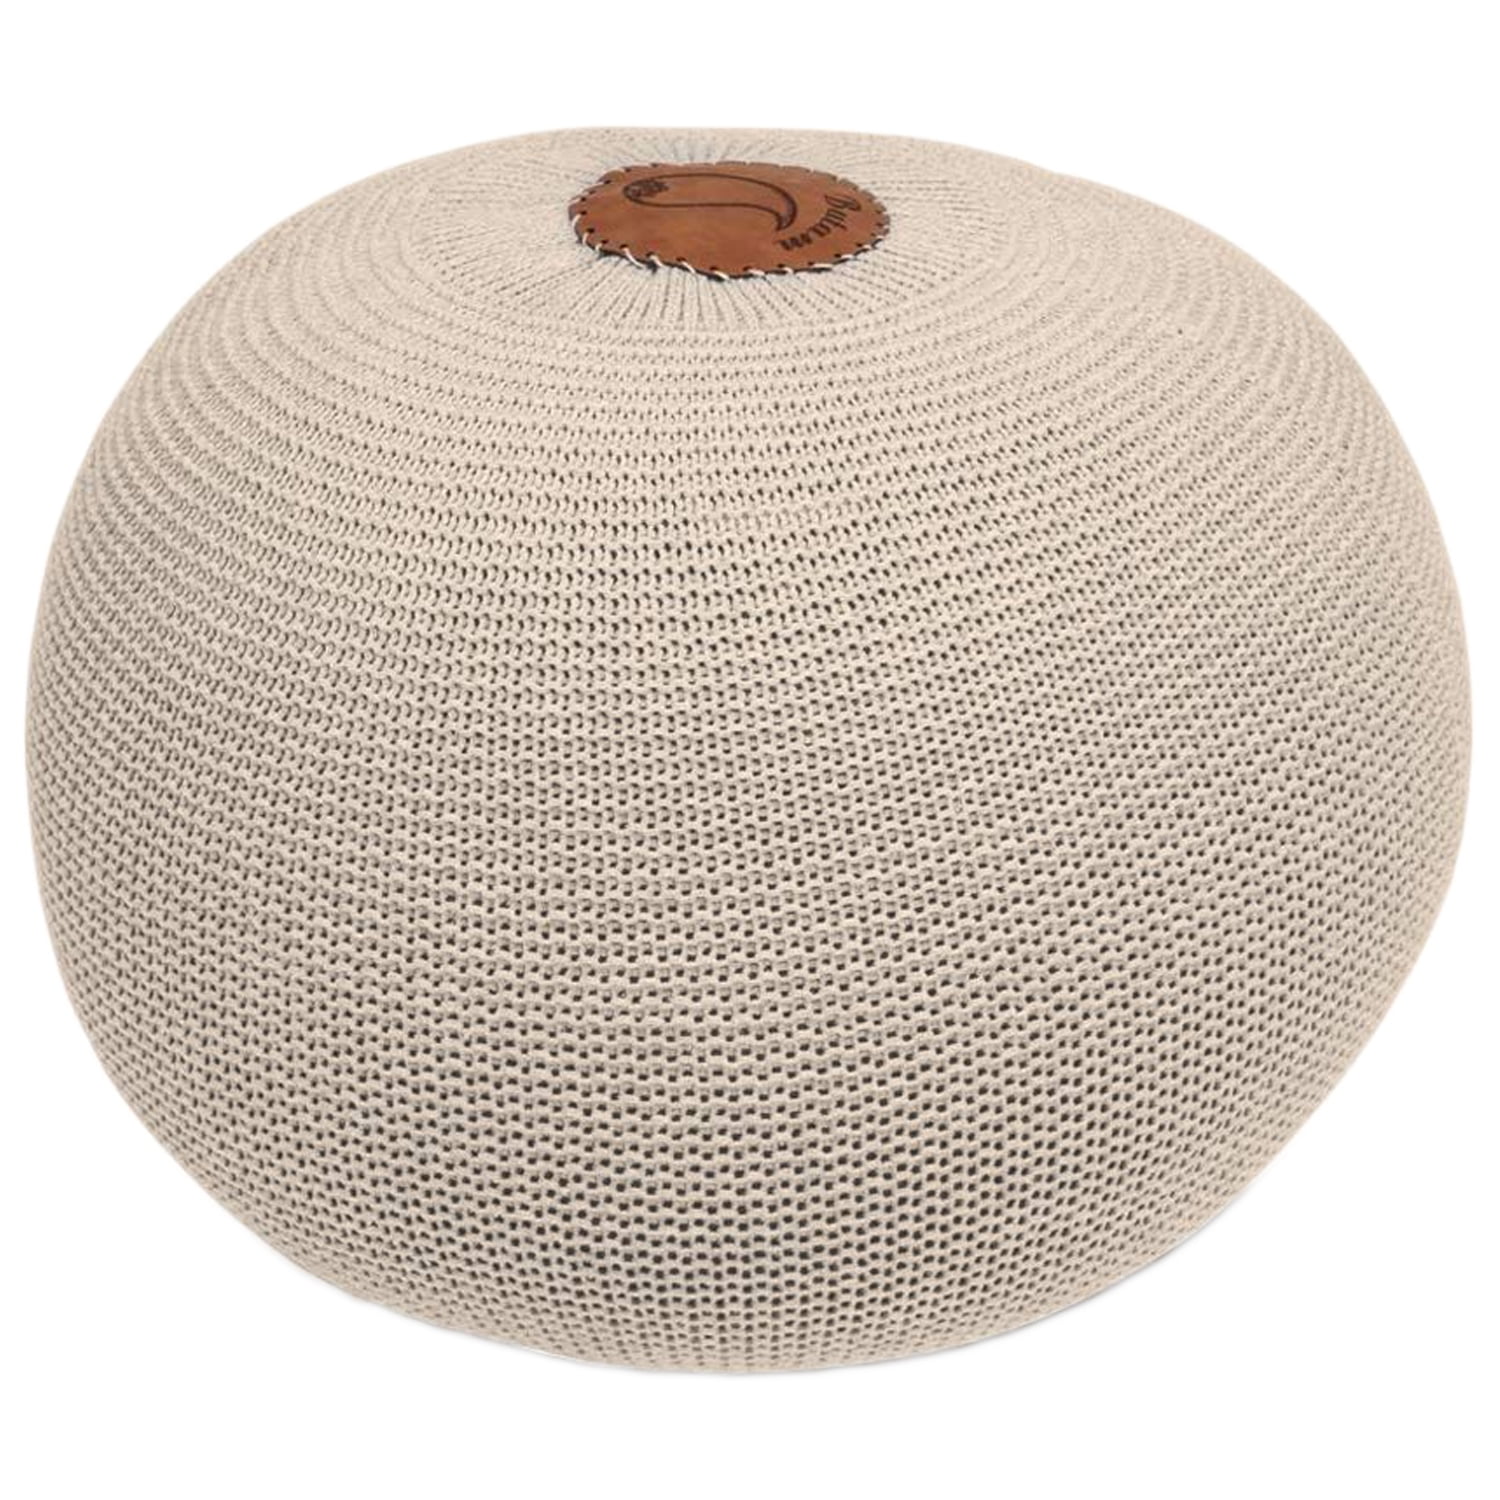 100% Cotton Round Knitted Pouffe 40 50 60CM Cushion Foot Stool Beanbag FREE POST 